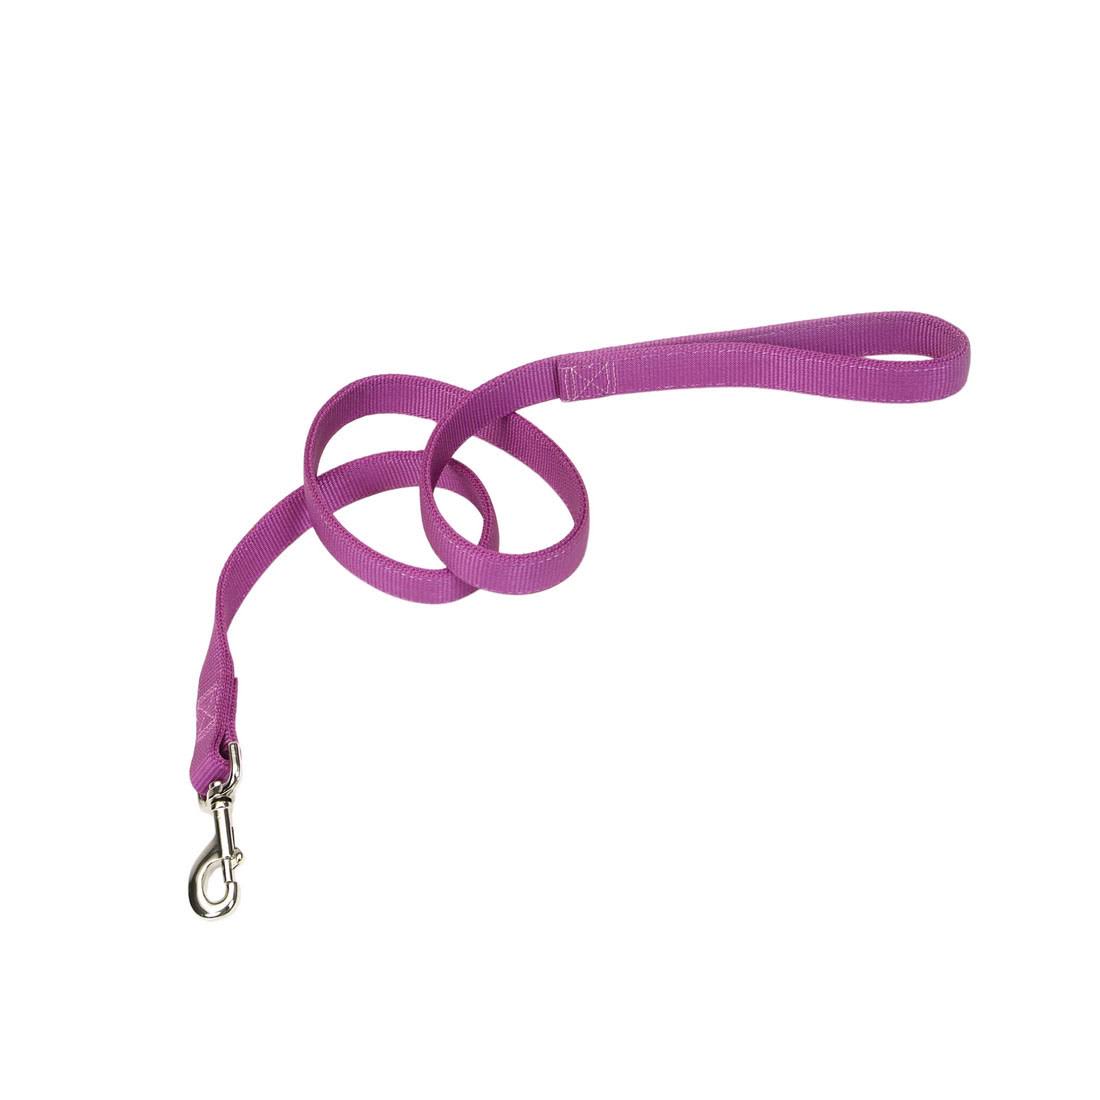 2904 04 Ord 1" Dbl Web Lead (Orchid)